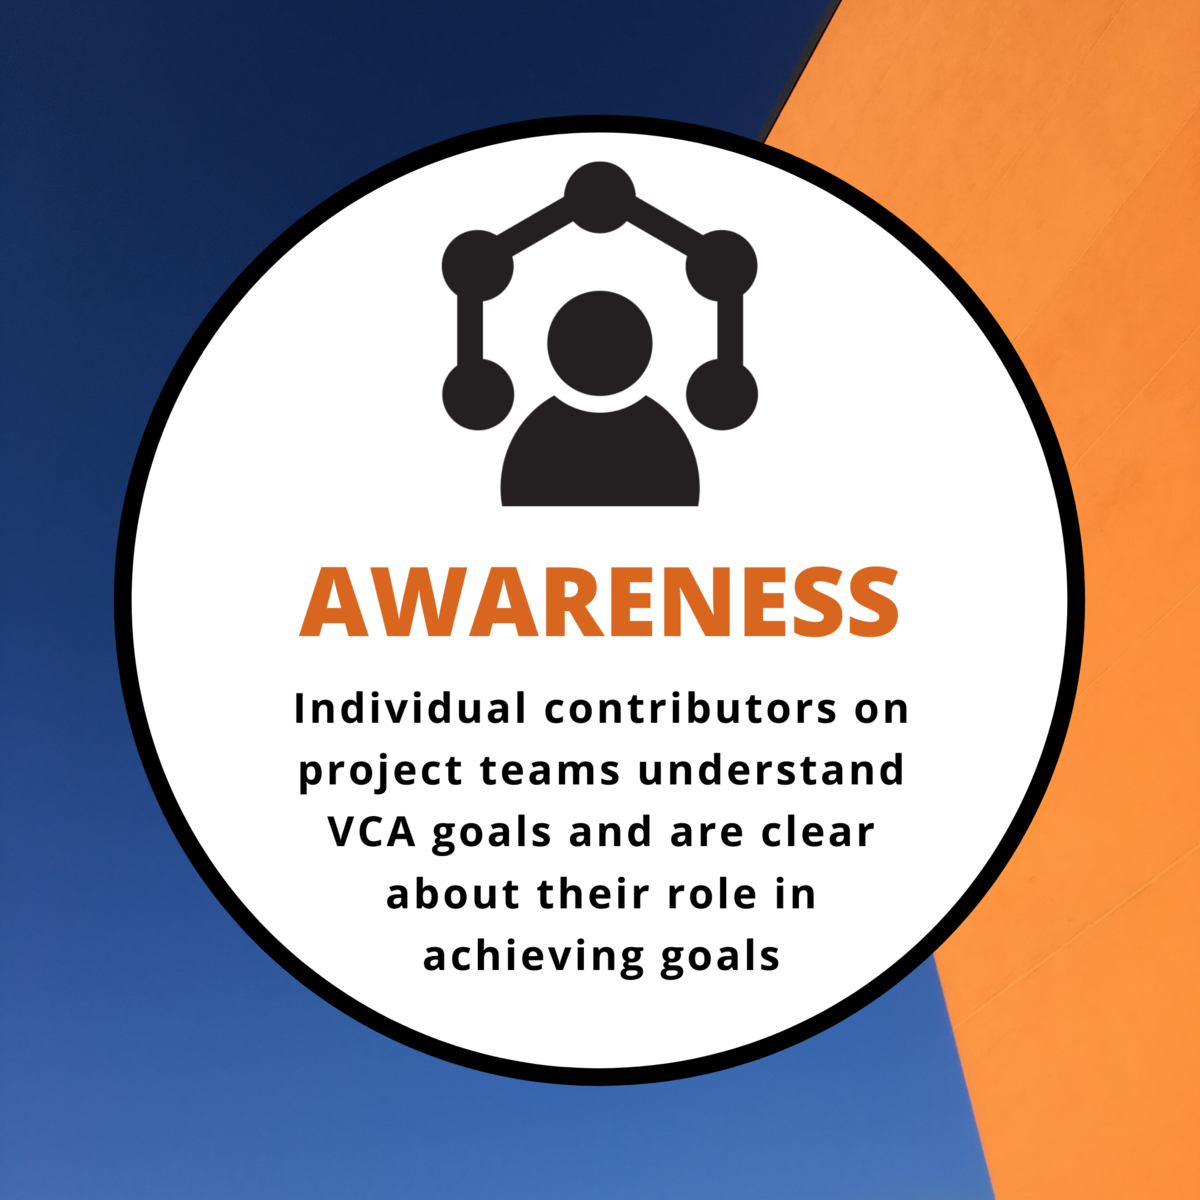 Awareness: Individuals on project teams understand VCA goals and are clear about their role